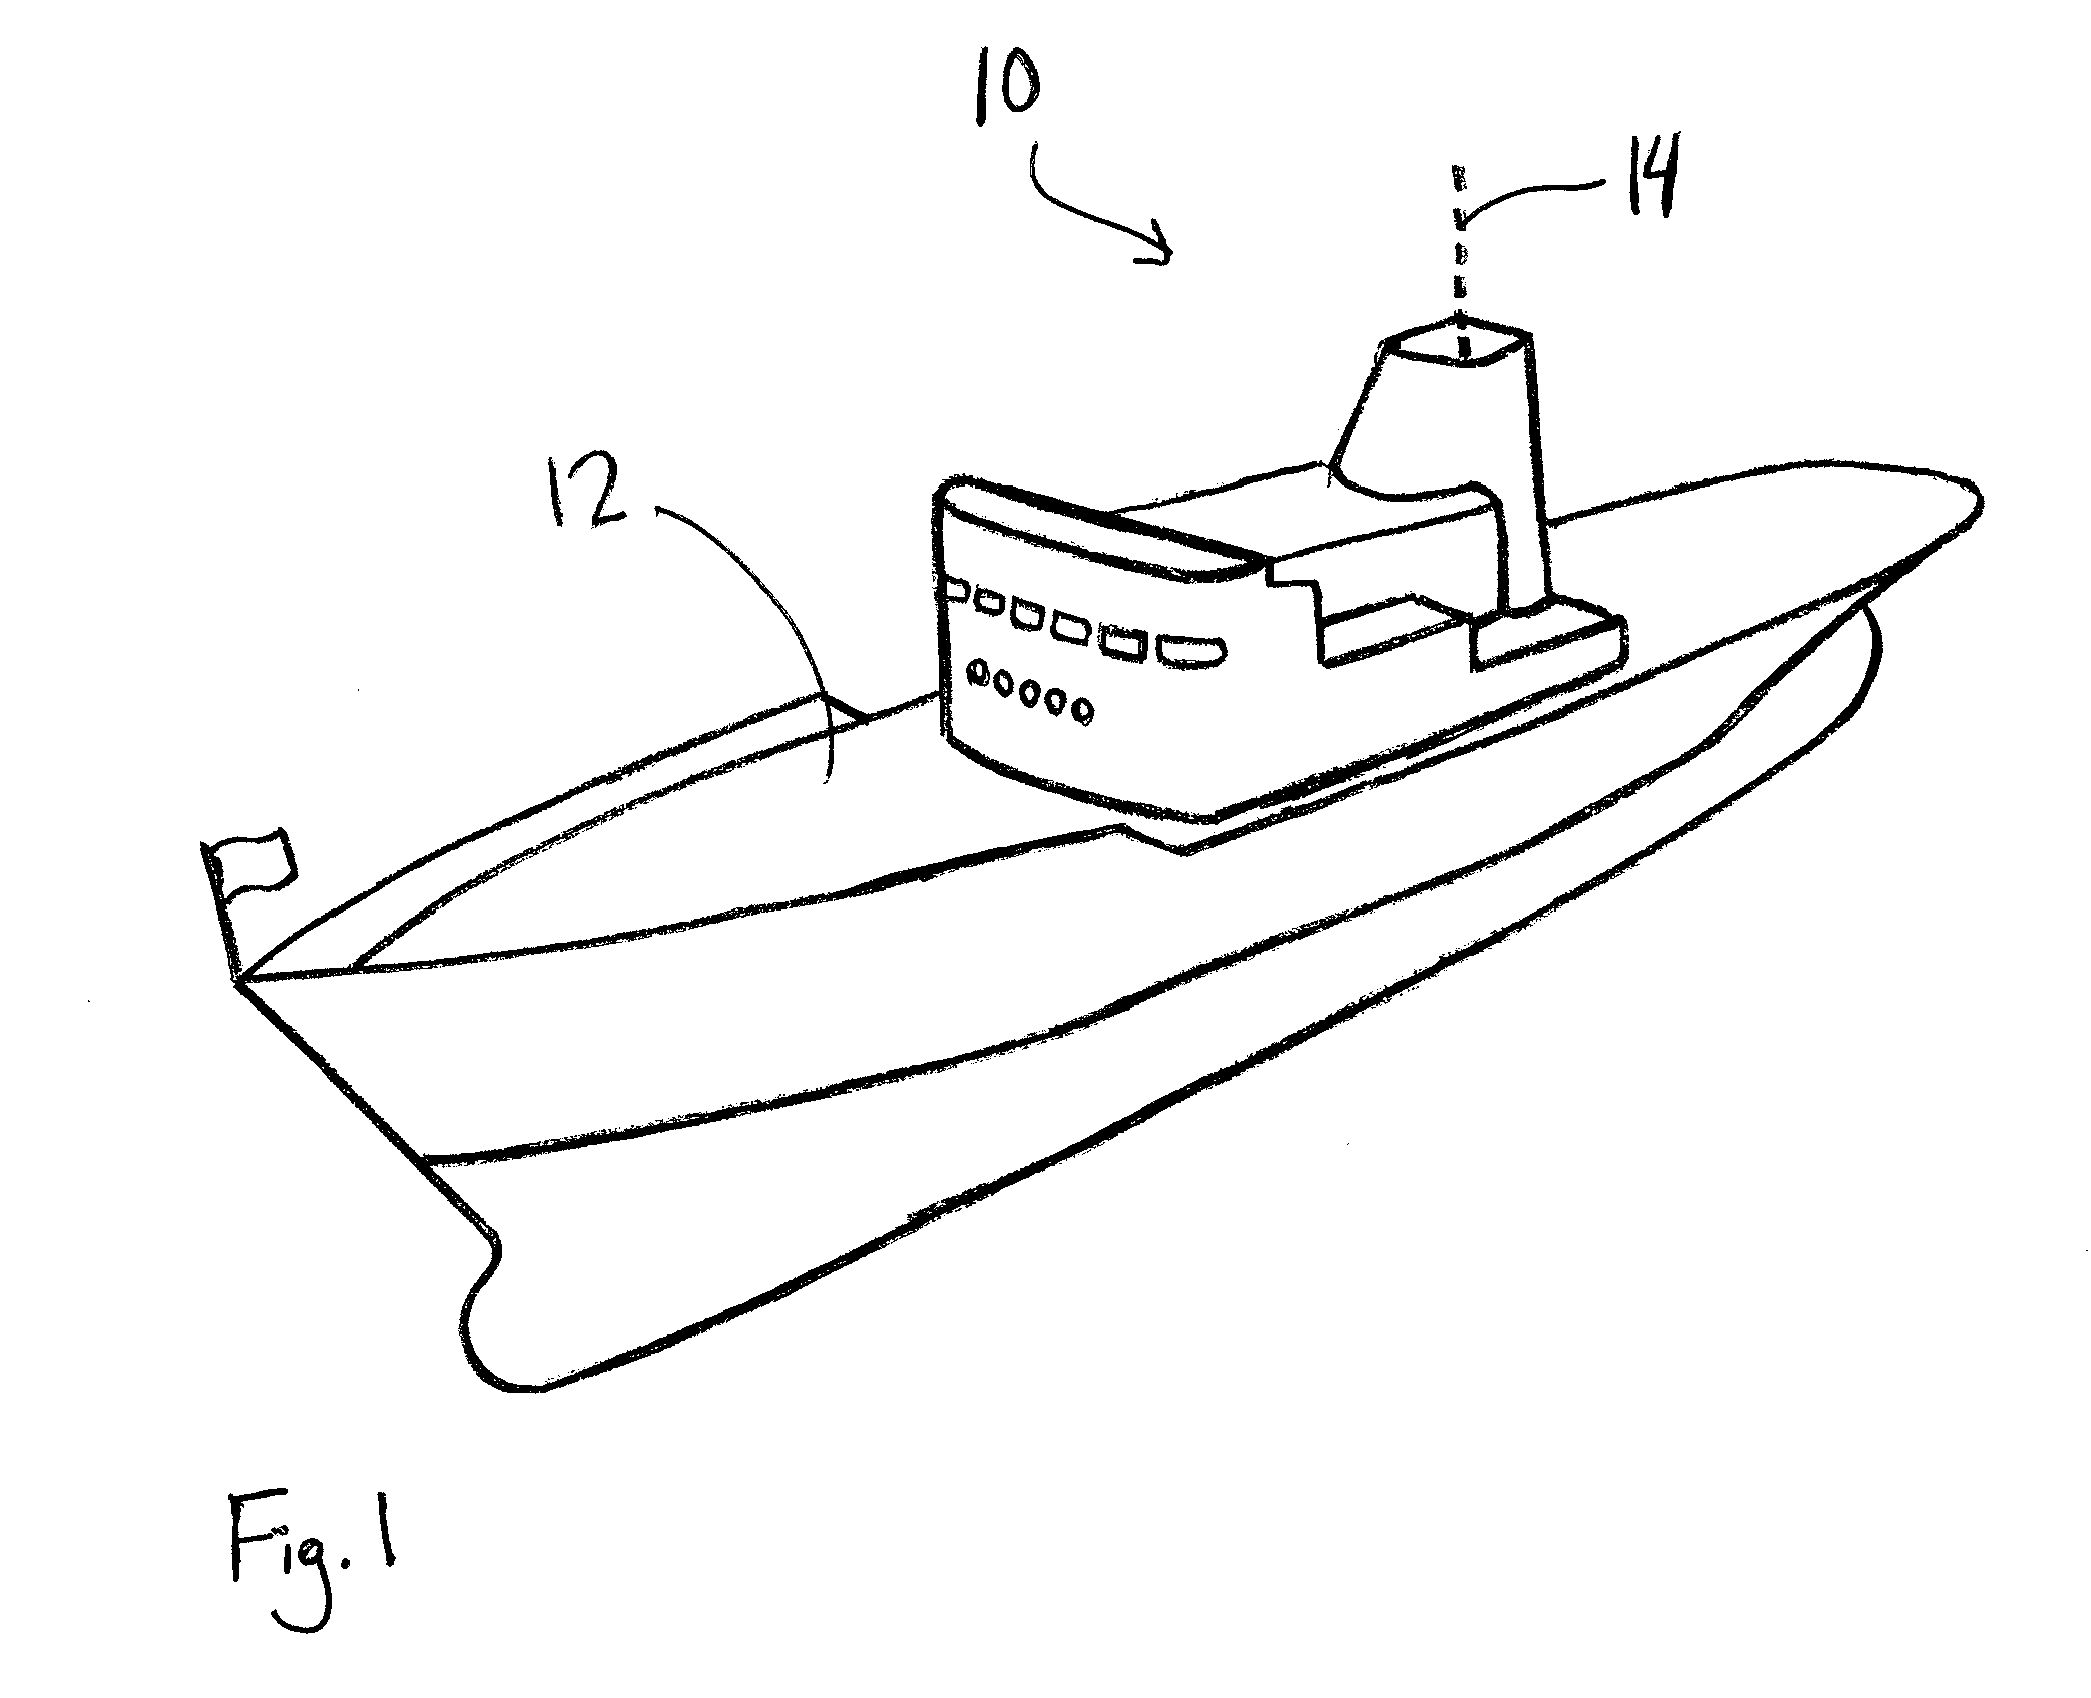 Shipboard Vessel Having a Vertically Aligned Scrubber and Process Component